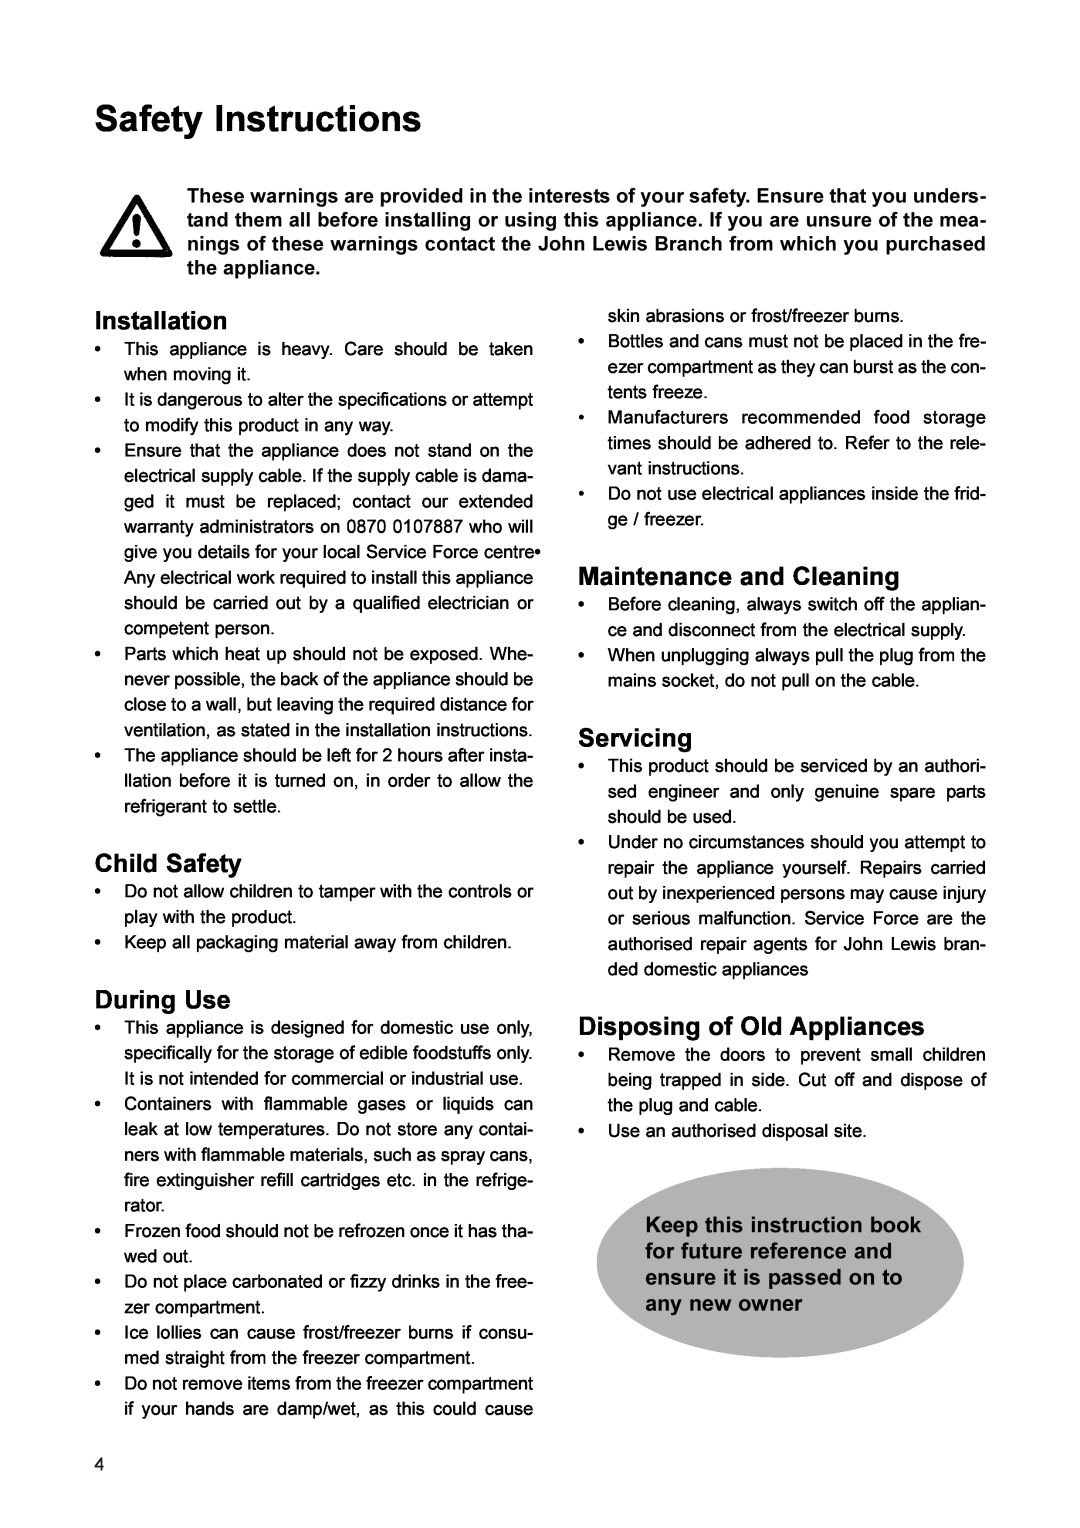 John Lewis JLFFW2001 Safety Instructions, Installation, Child Safety, Maintenance and Cleaning, Servicing, During Use 